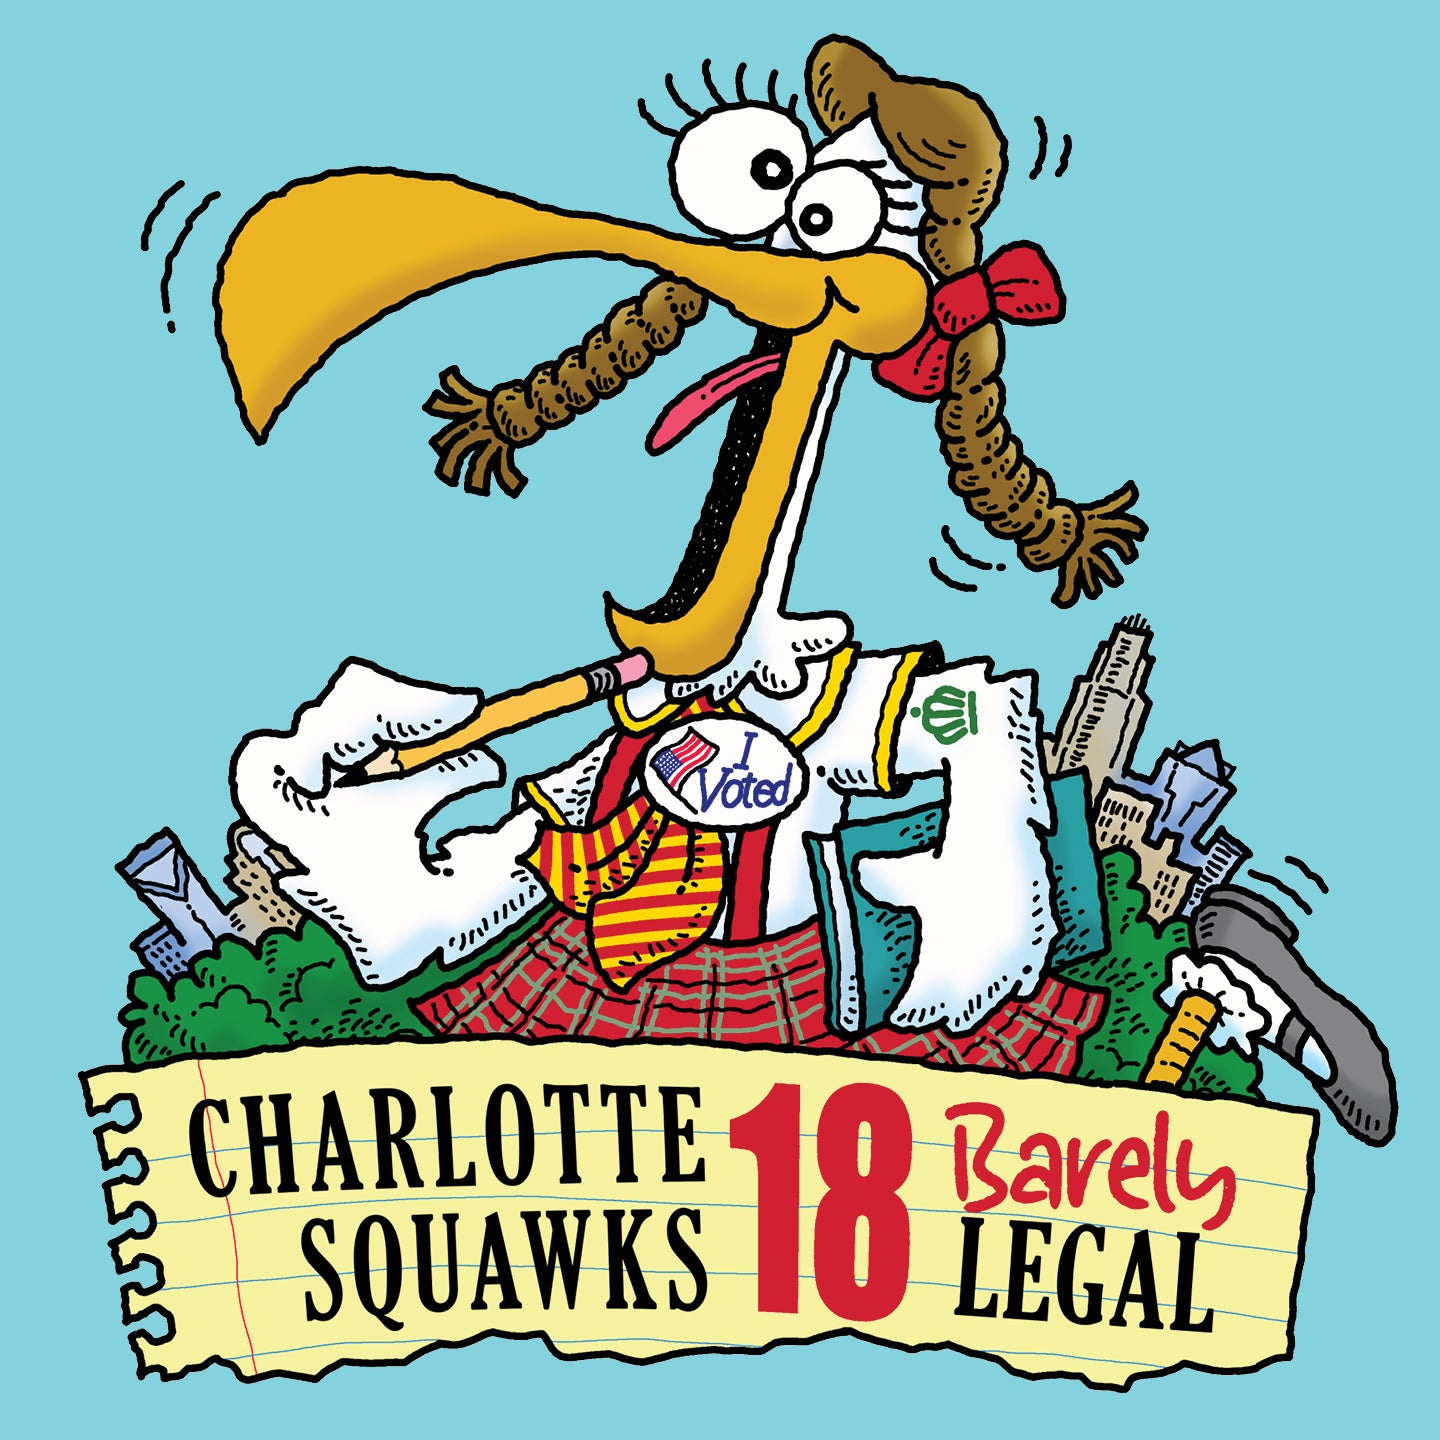 Charlotte Squawks 18: Barely Legal